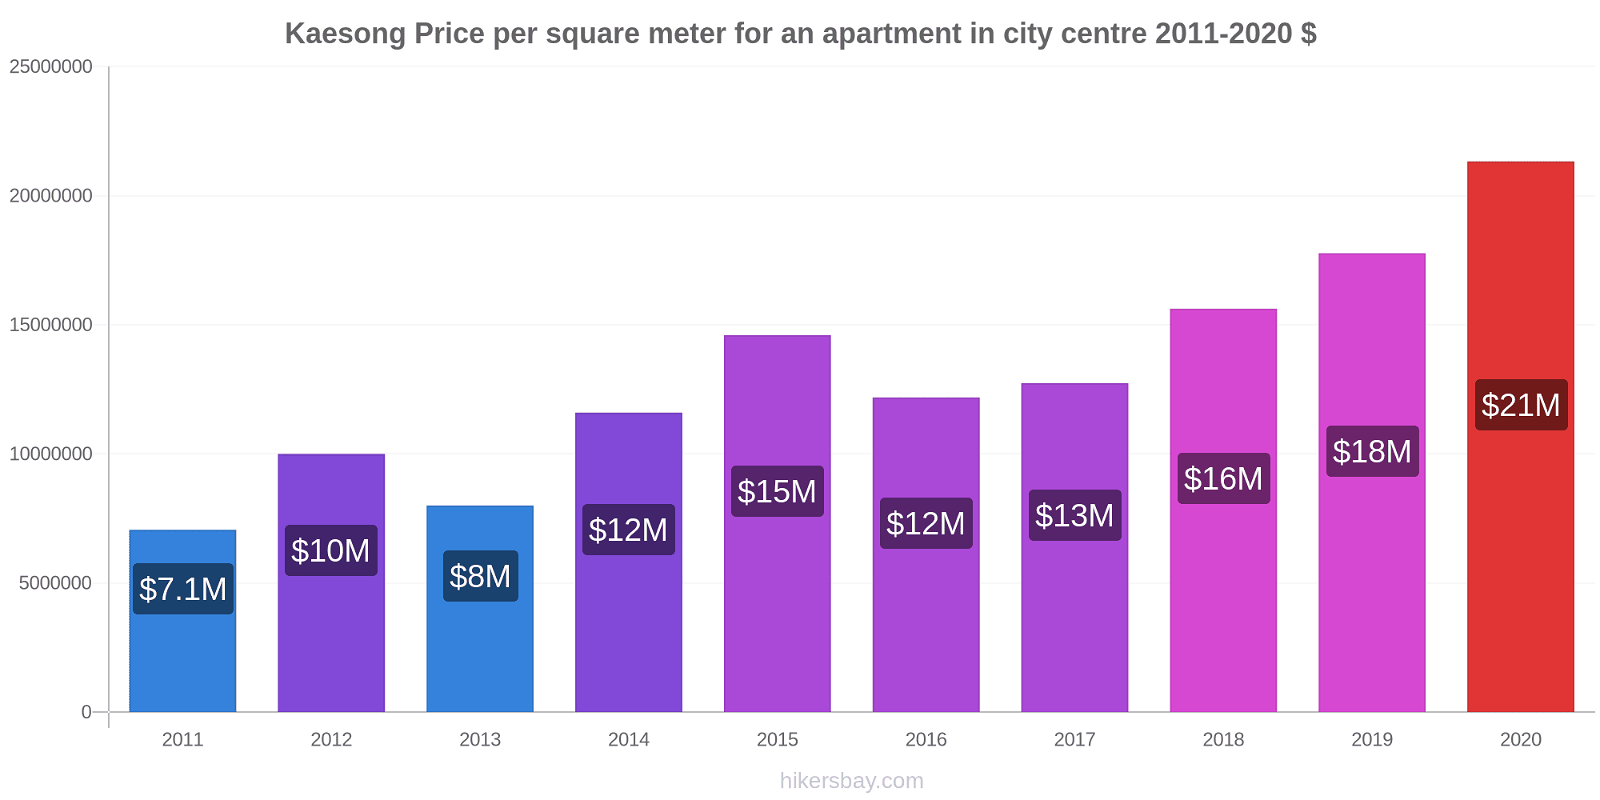 Kaesong price changes Price per square meter for an apartment in city centre hikersbay.com